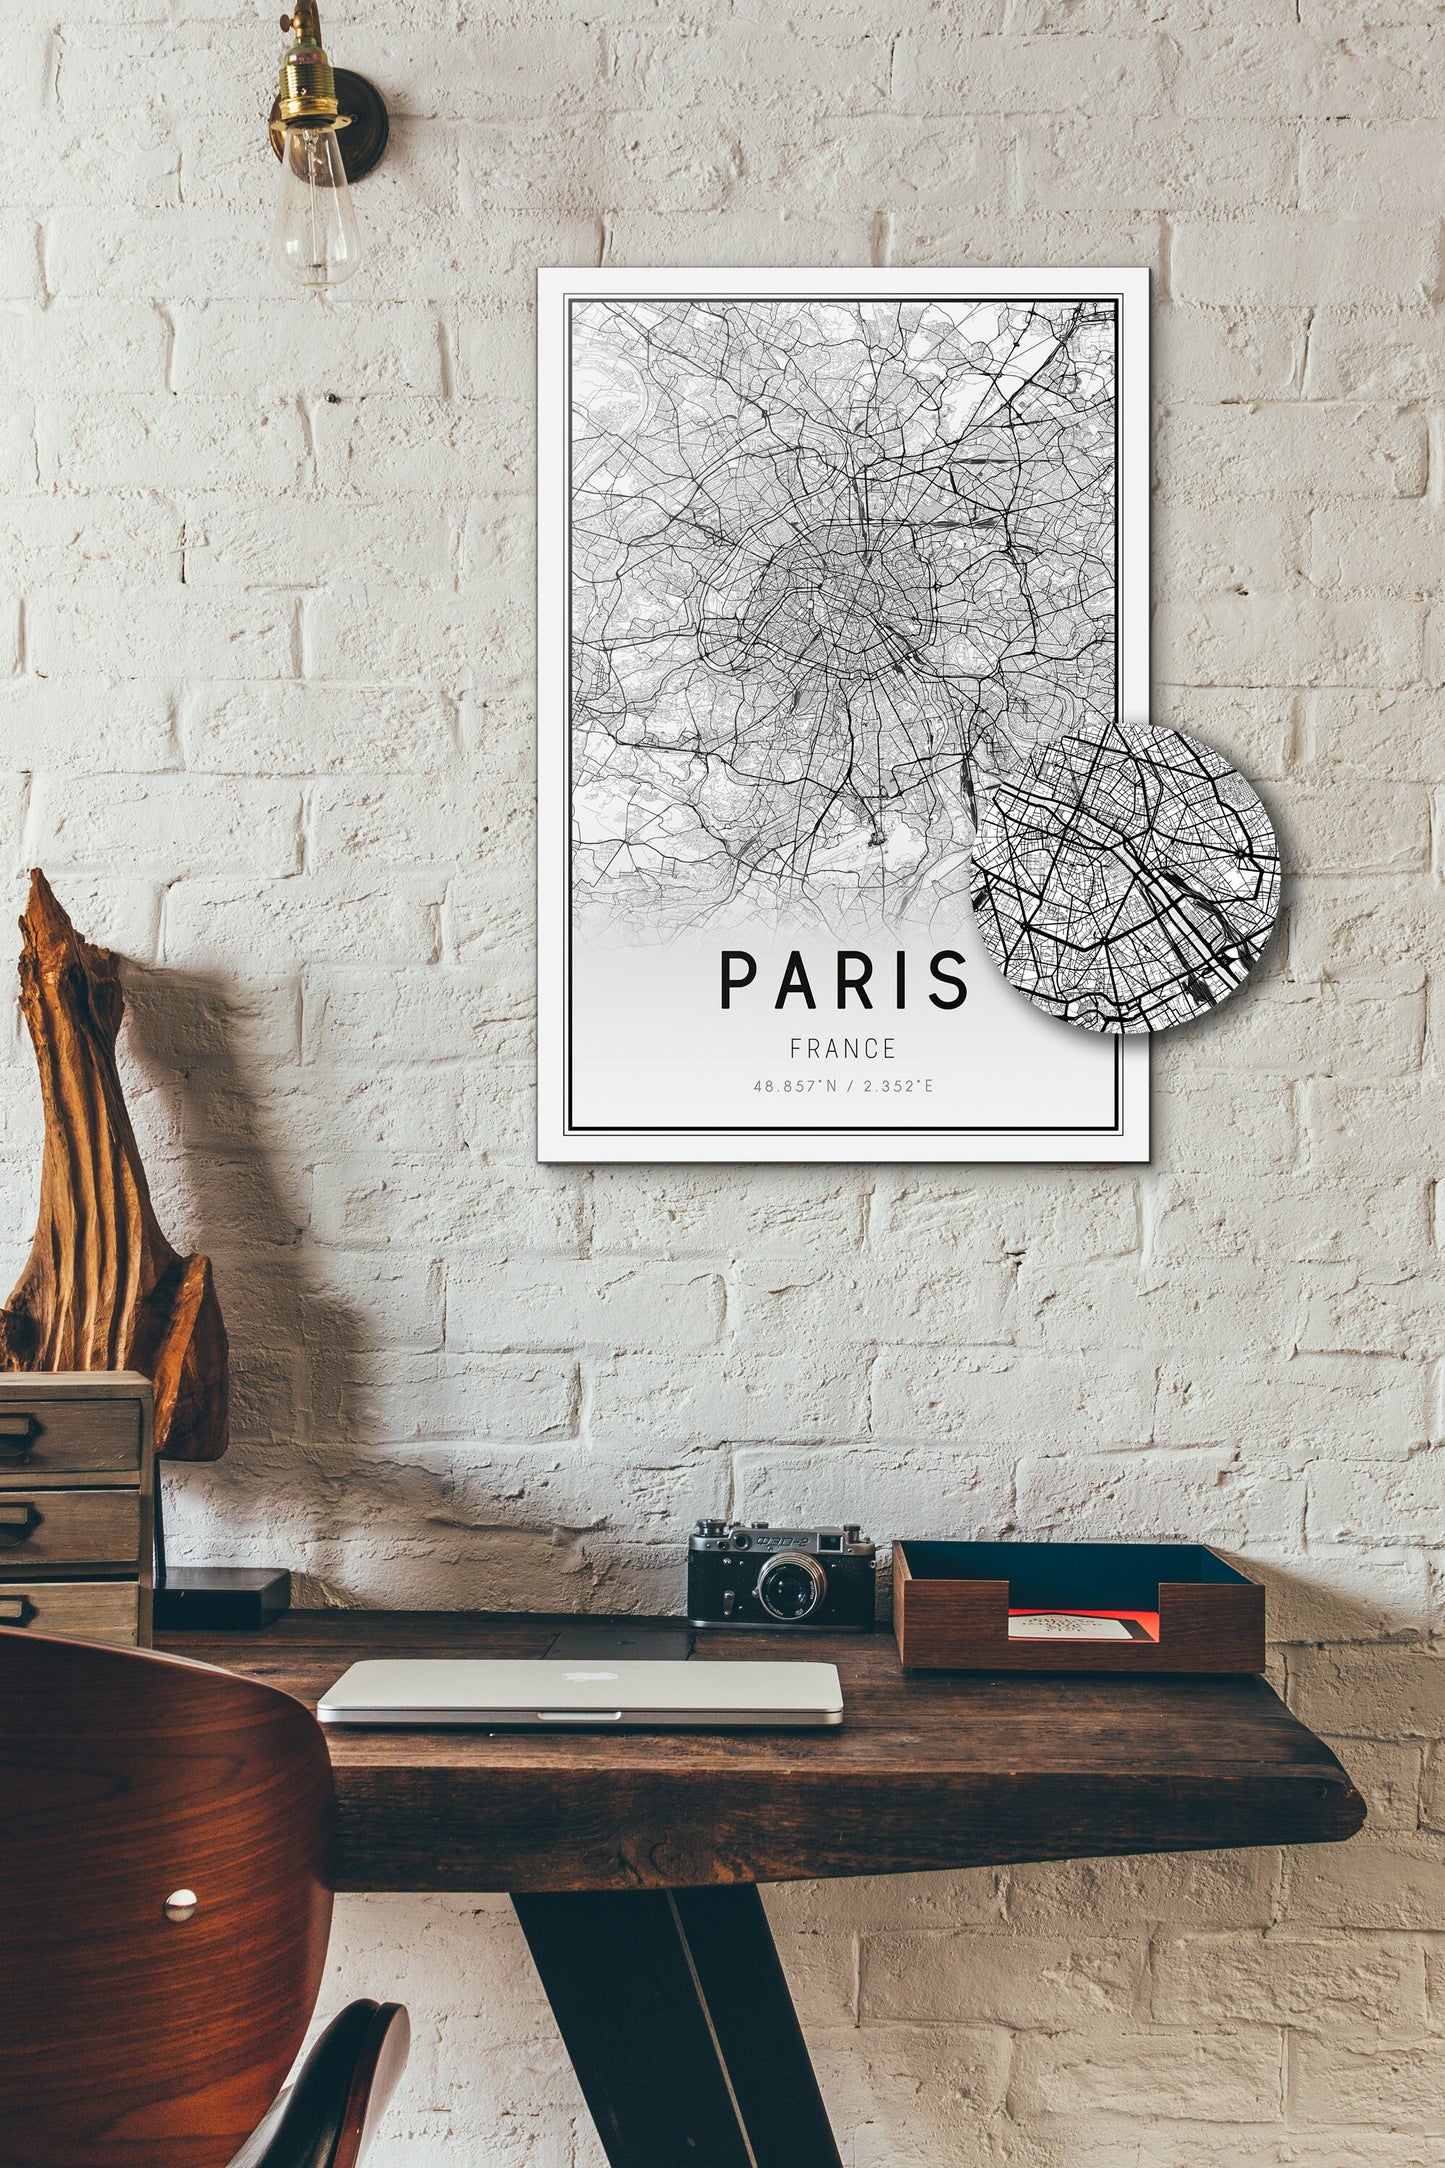 Paris City street map with inset detail